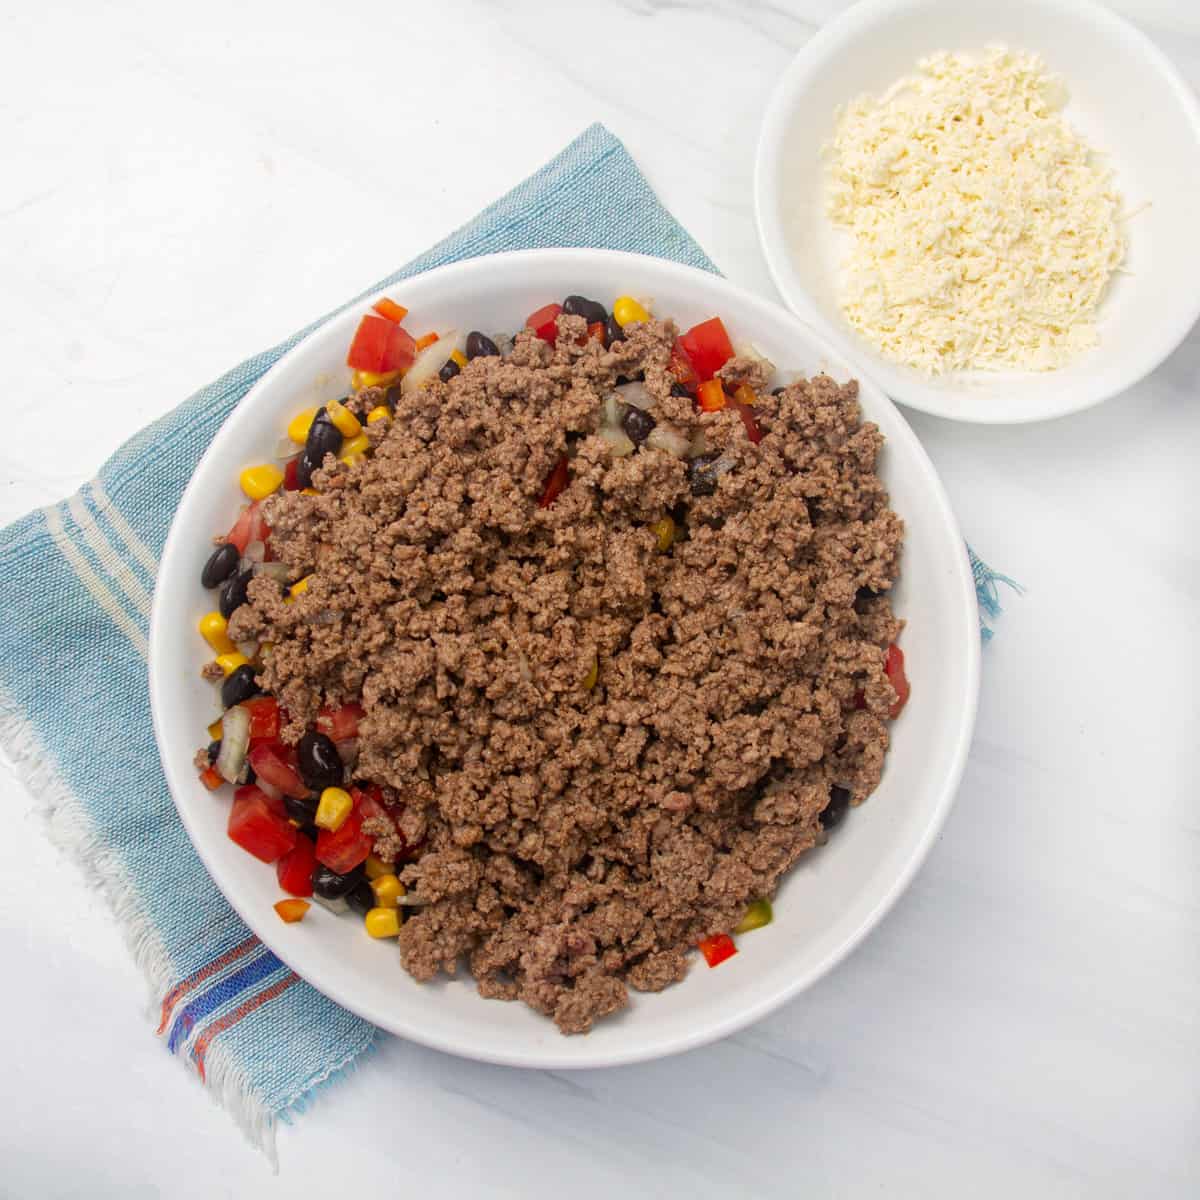 Cooked ground beef added to the mixture of beans and vegetables.